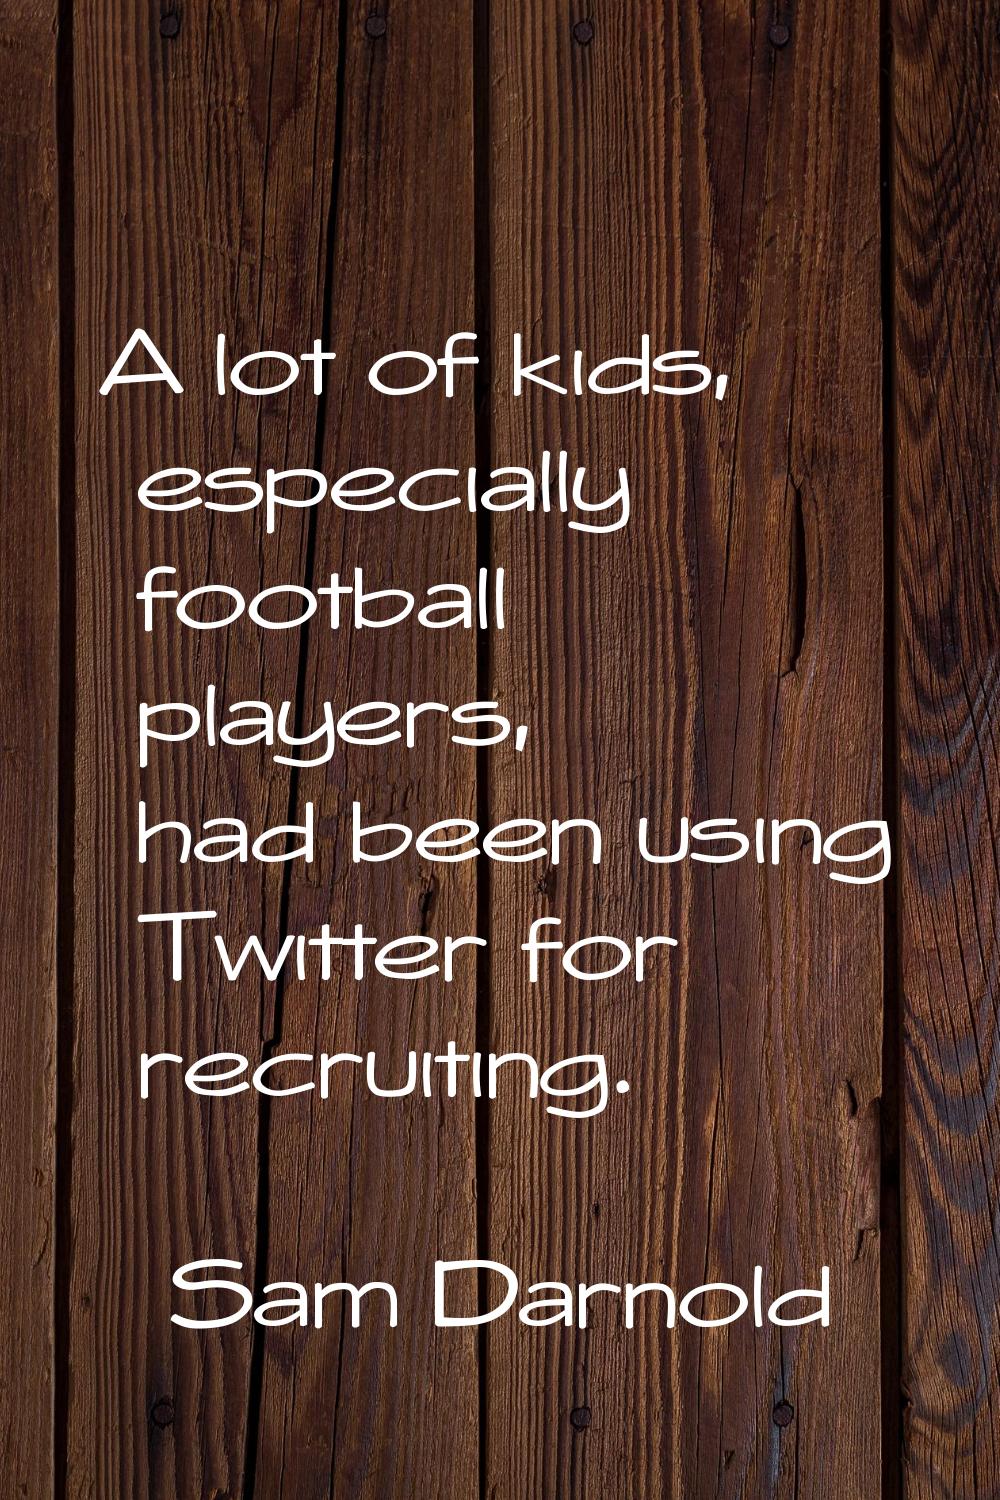 A lot of kids, especially football players, had been using Twitter for recruiting.